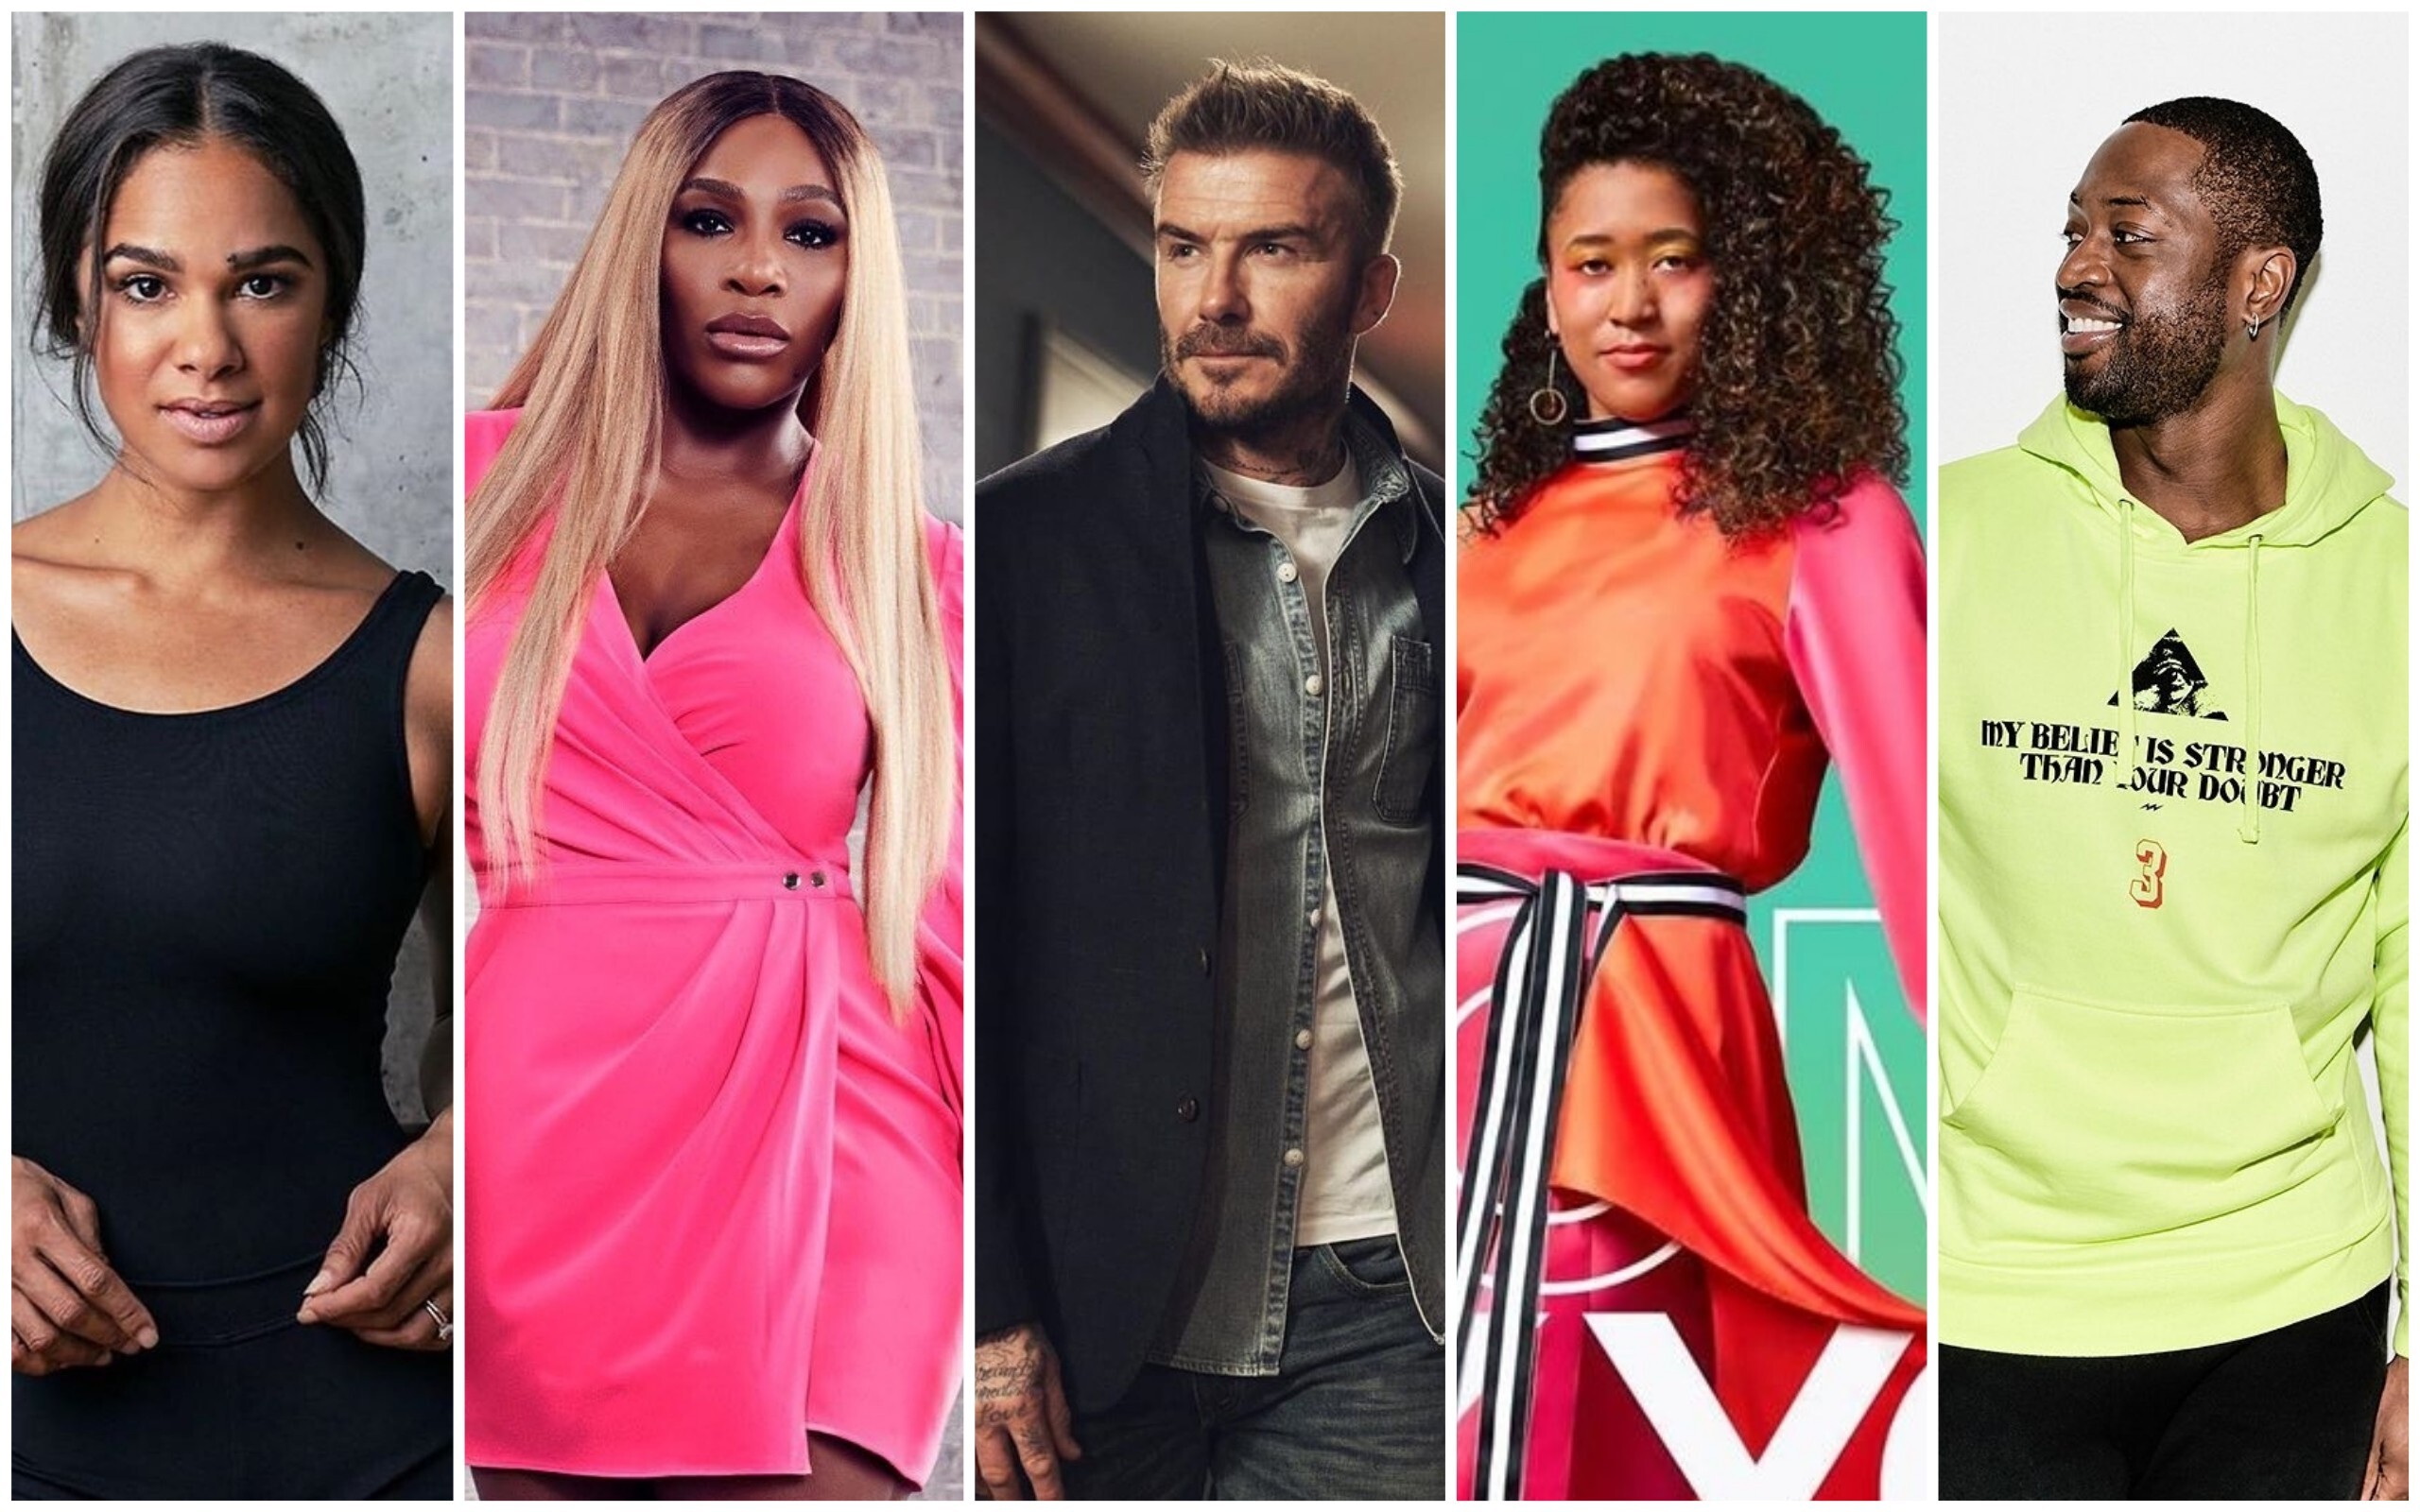 Sports celebrities Misty Copeland, Serena Williams, David Beckham, Naomi Osaka and Dwyane Wade have all branched out into fashion. Photo: Instagram